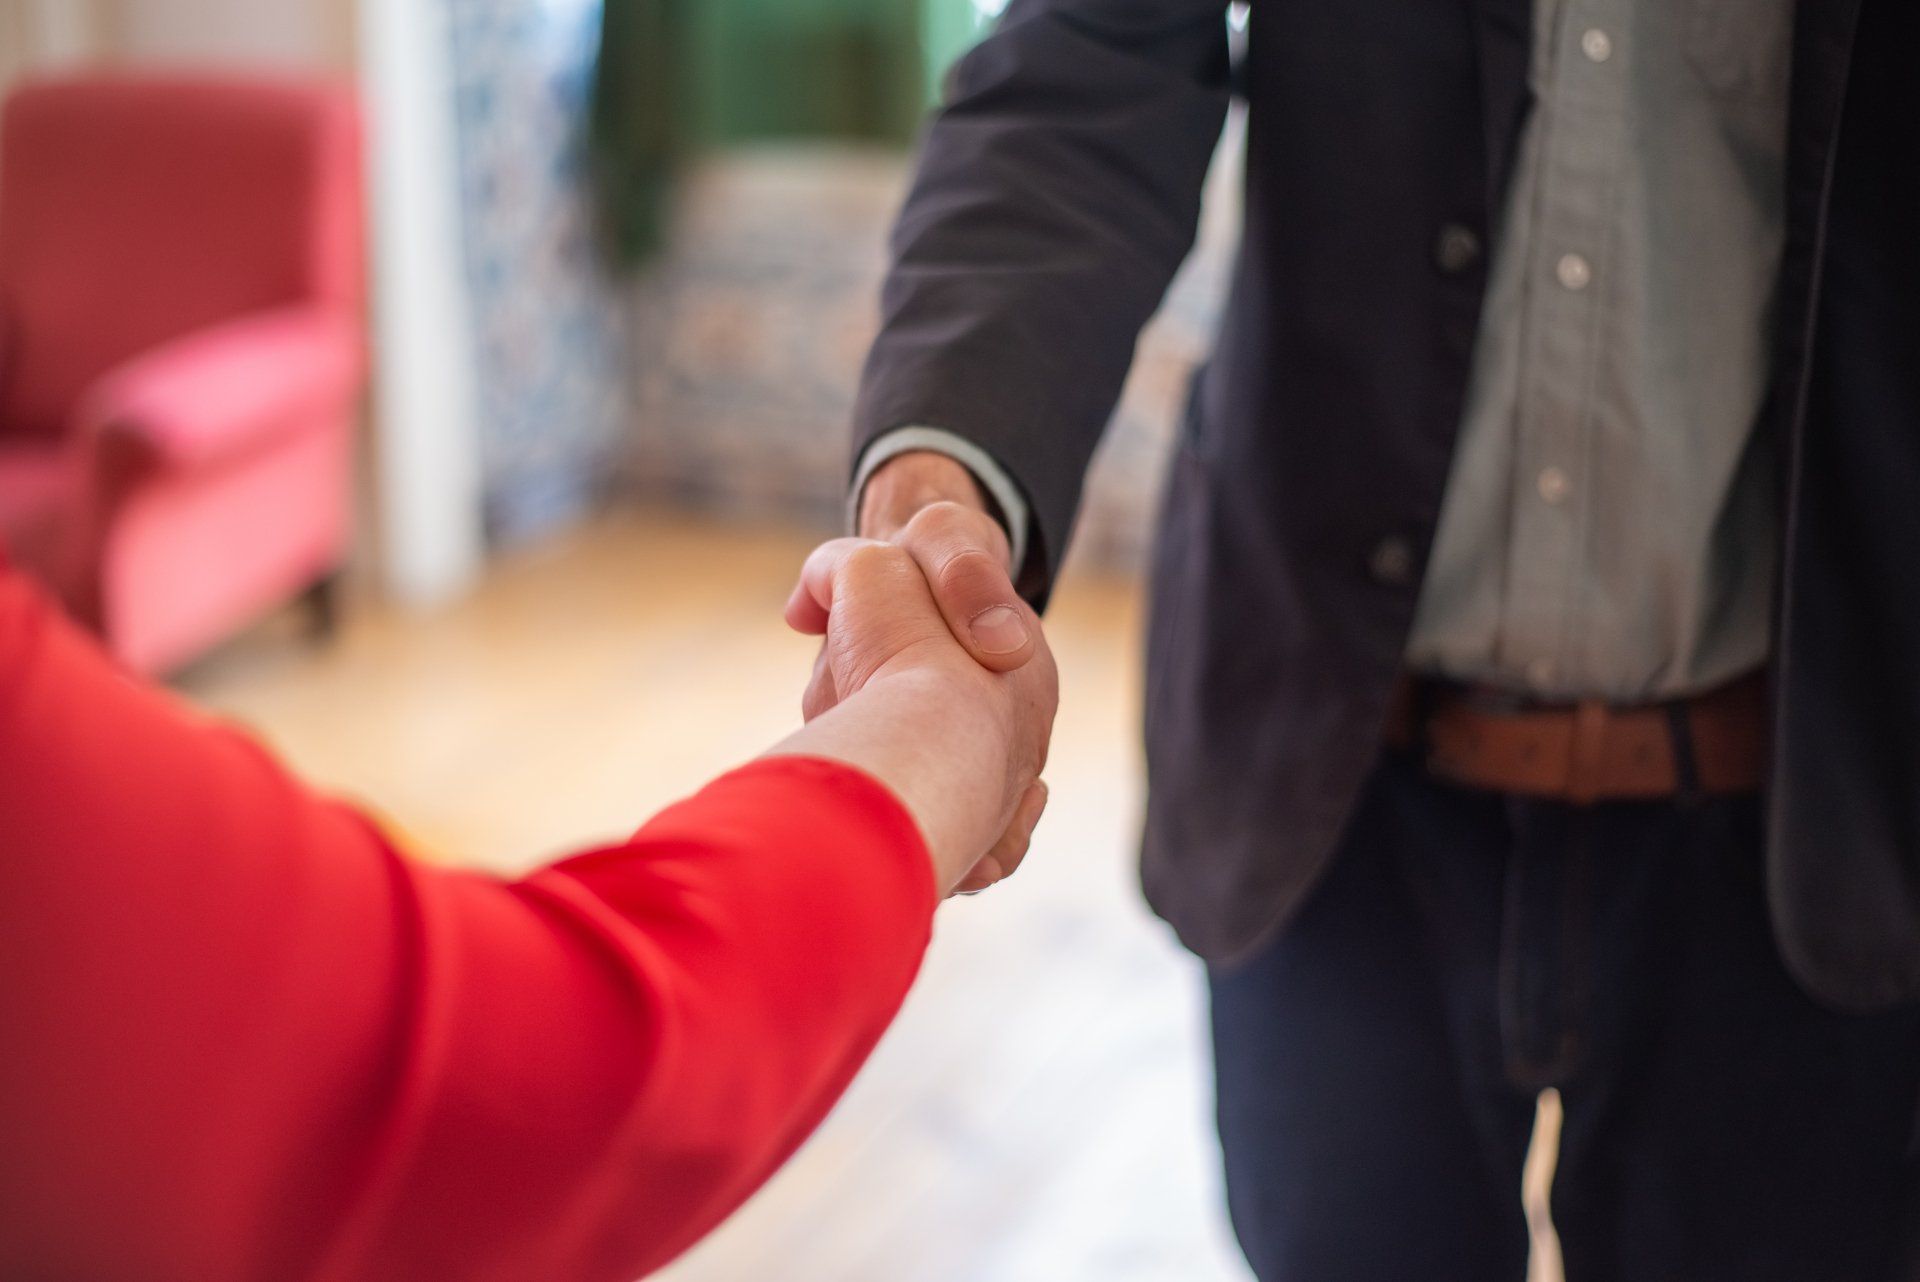 a man and a woman are shaking hands after a vehicle repair transaction